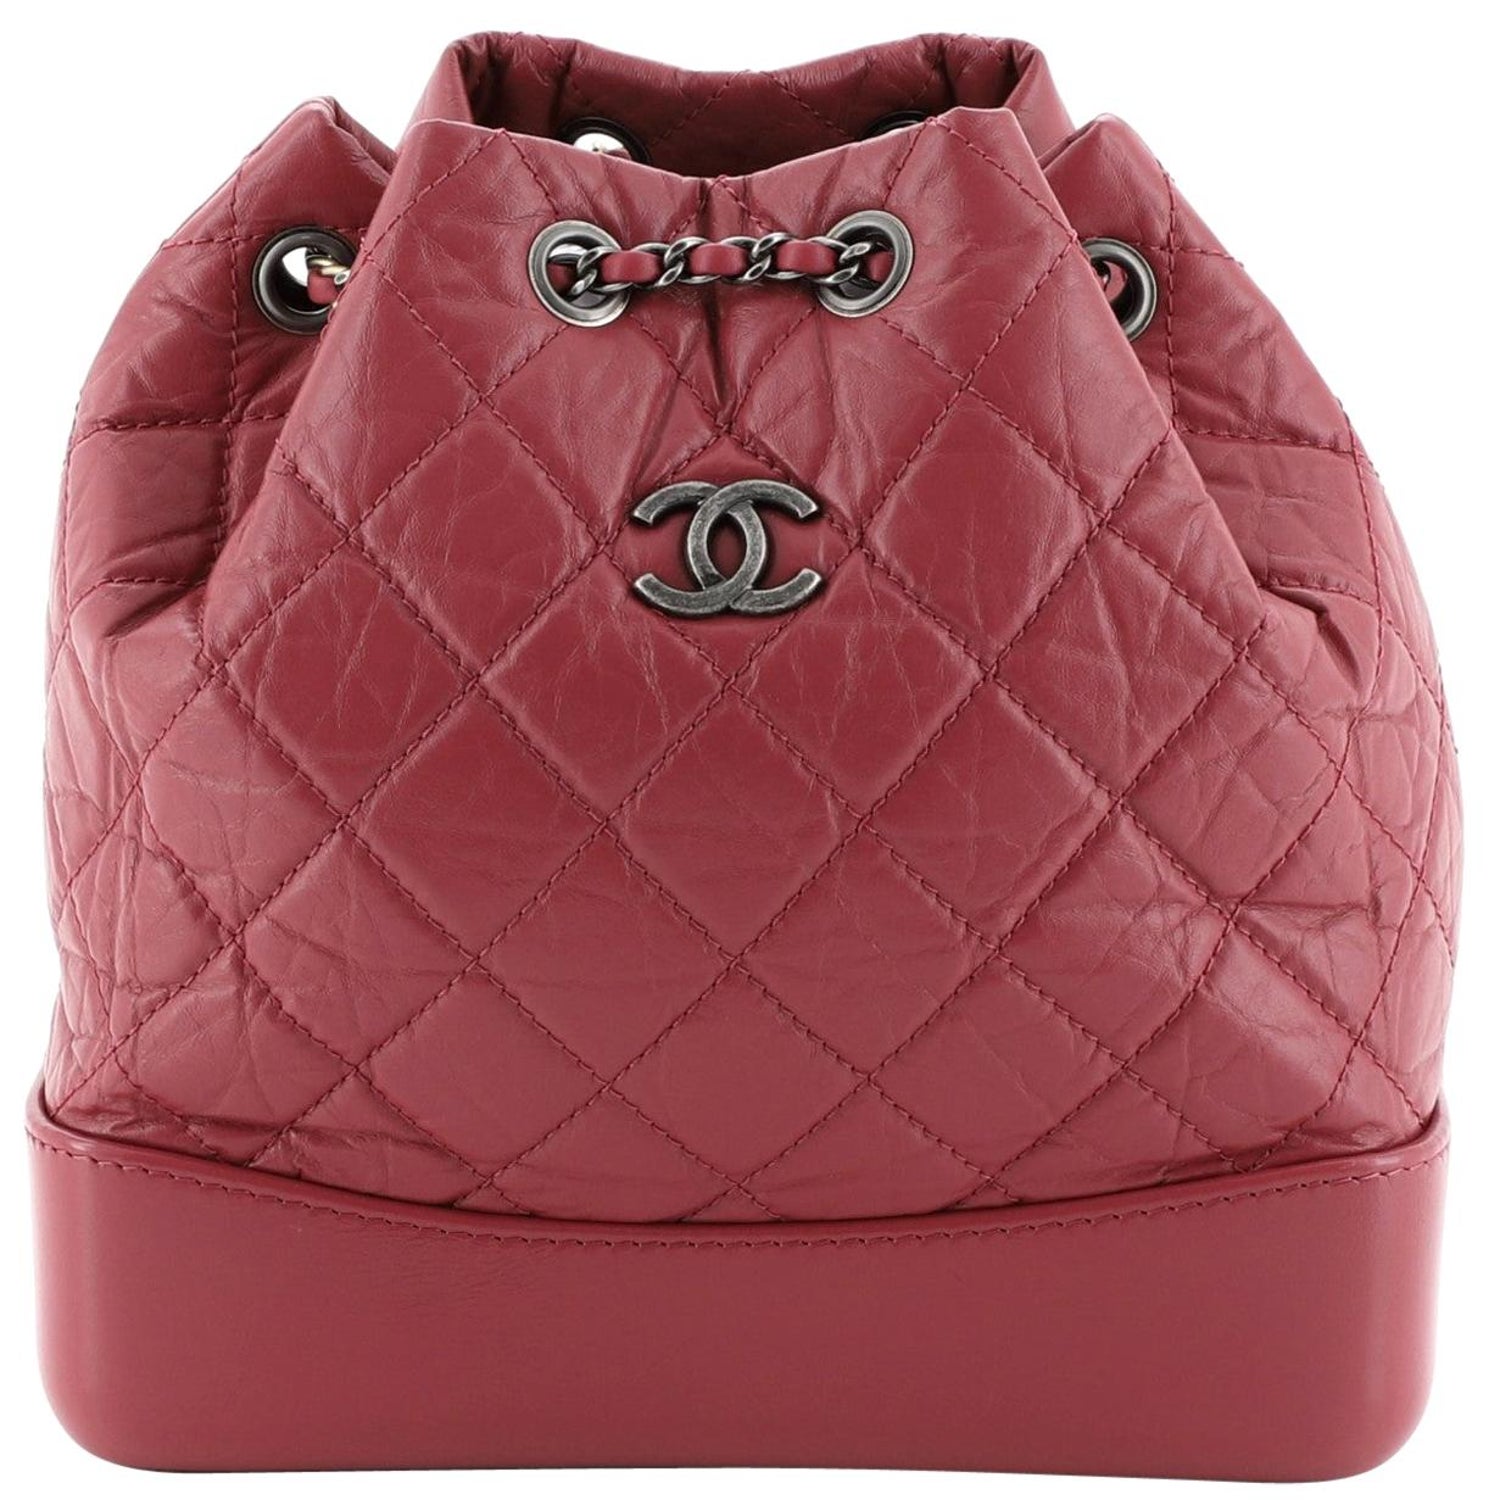 Gabrielle Backpack - For Sale on 1stDibs | chanel gabrielle backpack price, chanel  gabrielle backpack, chanel gabrielle backpack small